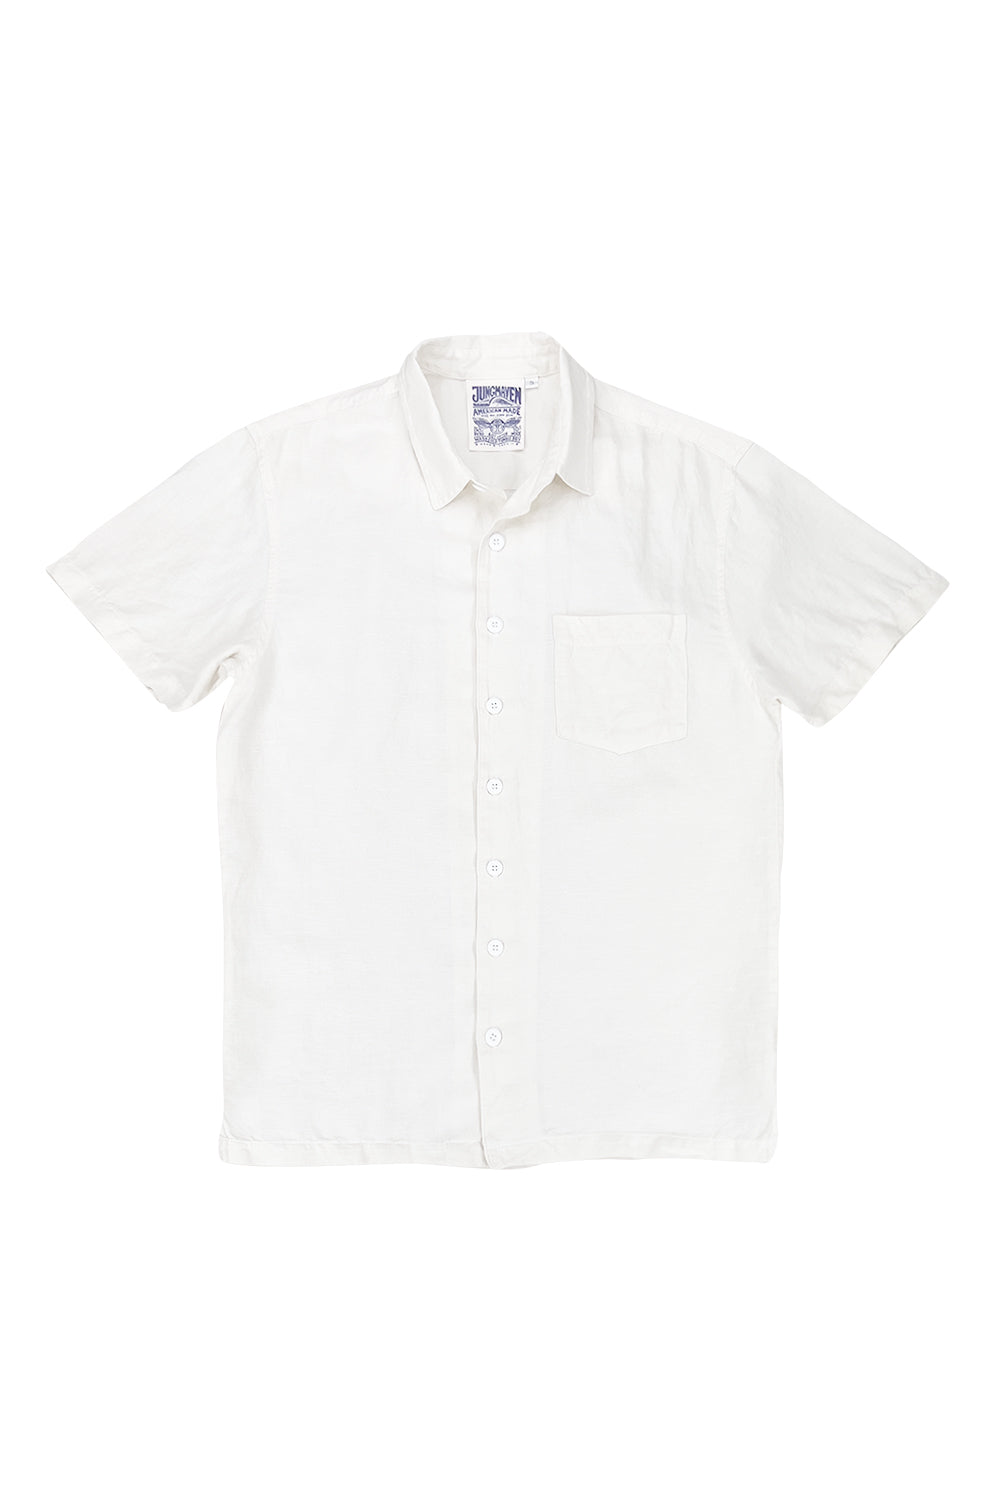 Tornado Shirt | Jungmaven Hemp Clothing & Accessories / Color: Washed White